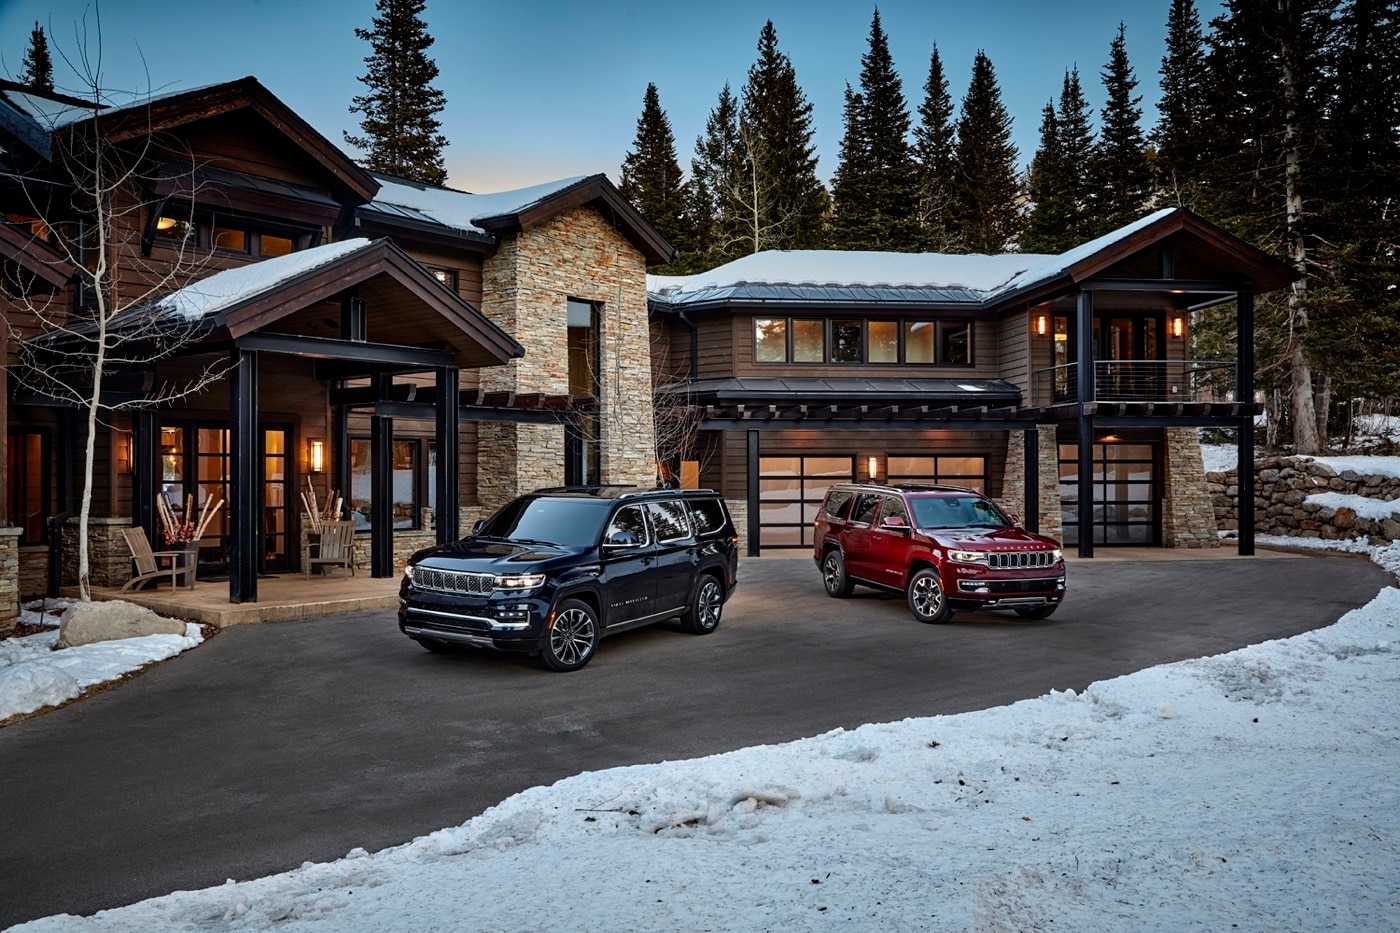 The Jeep Grand Wagoneer to the left of the 2022 Wagoneer parked in the courtyard of a chalet during the winter season